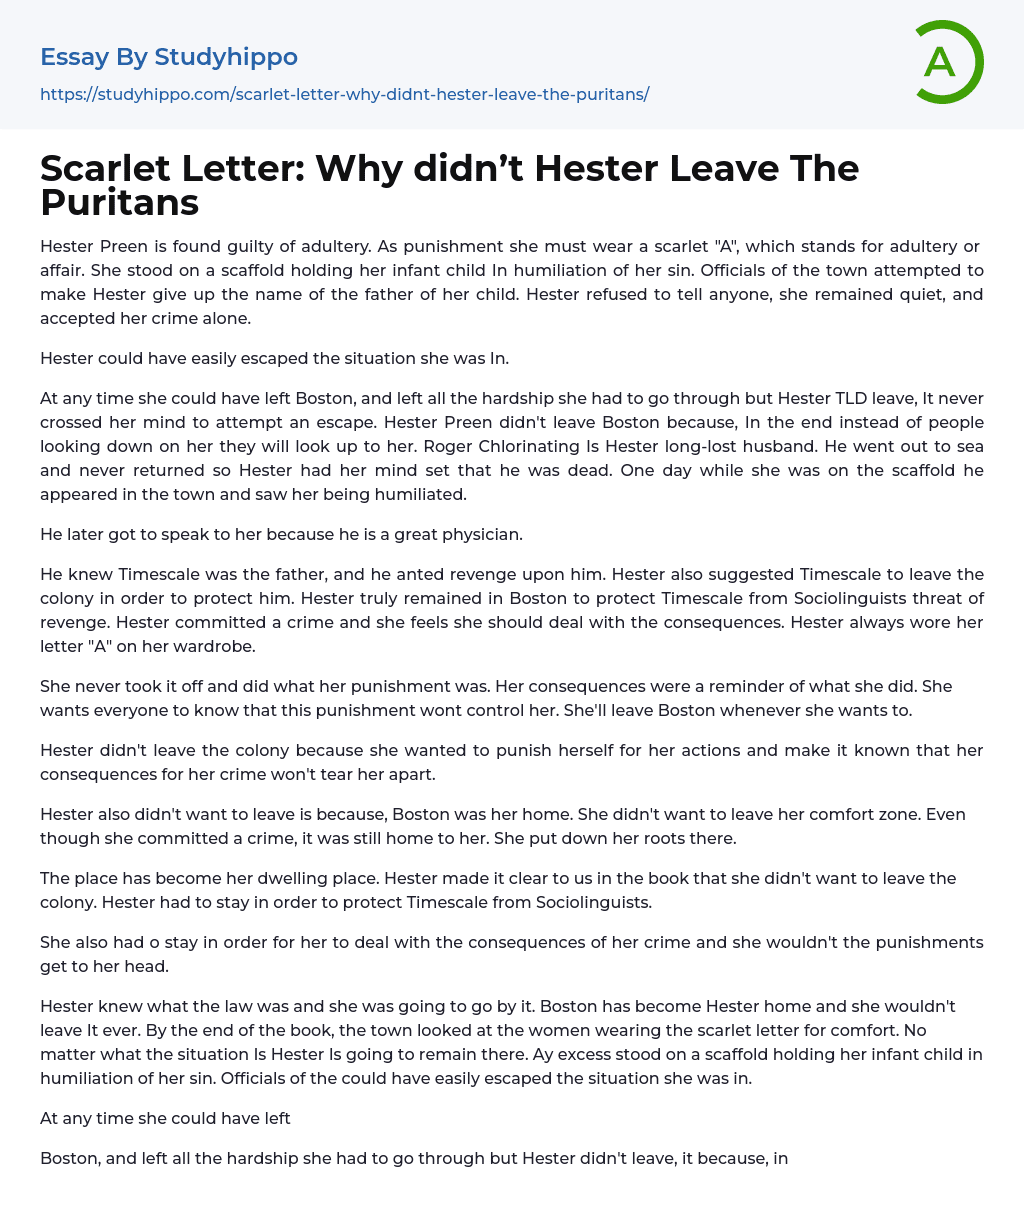 Scarlet Letter: Why didn’t Hester Leave The Puritans Essay Example